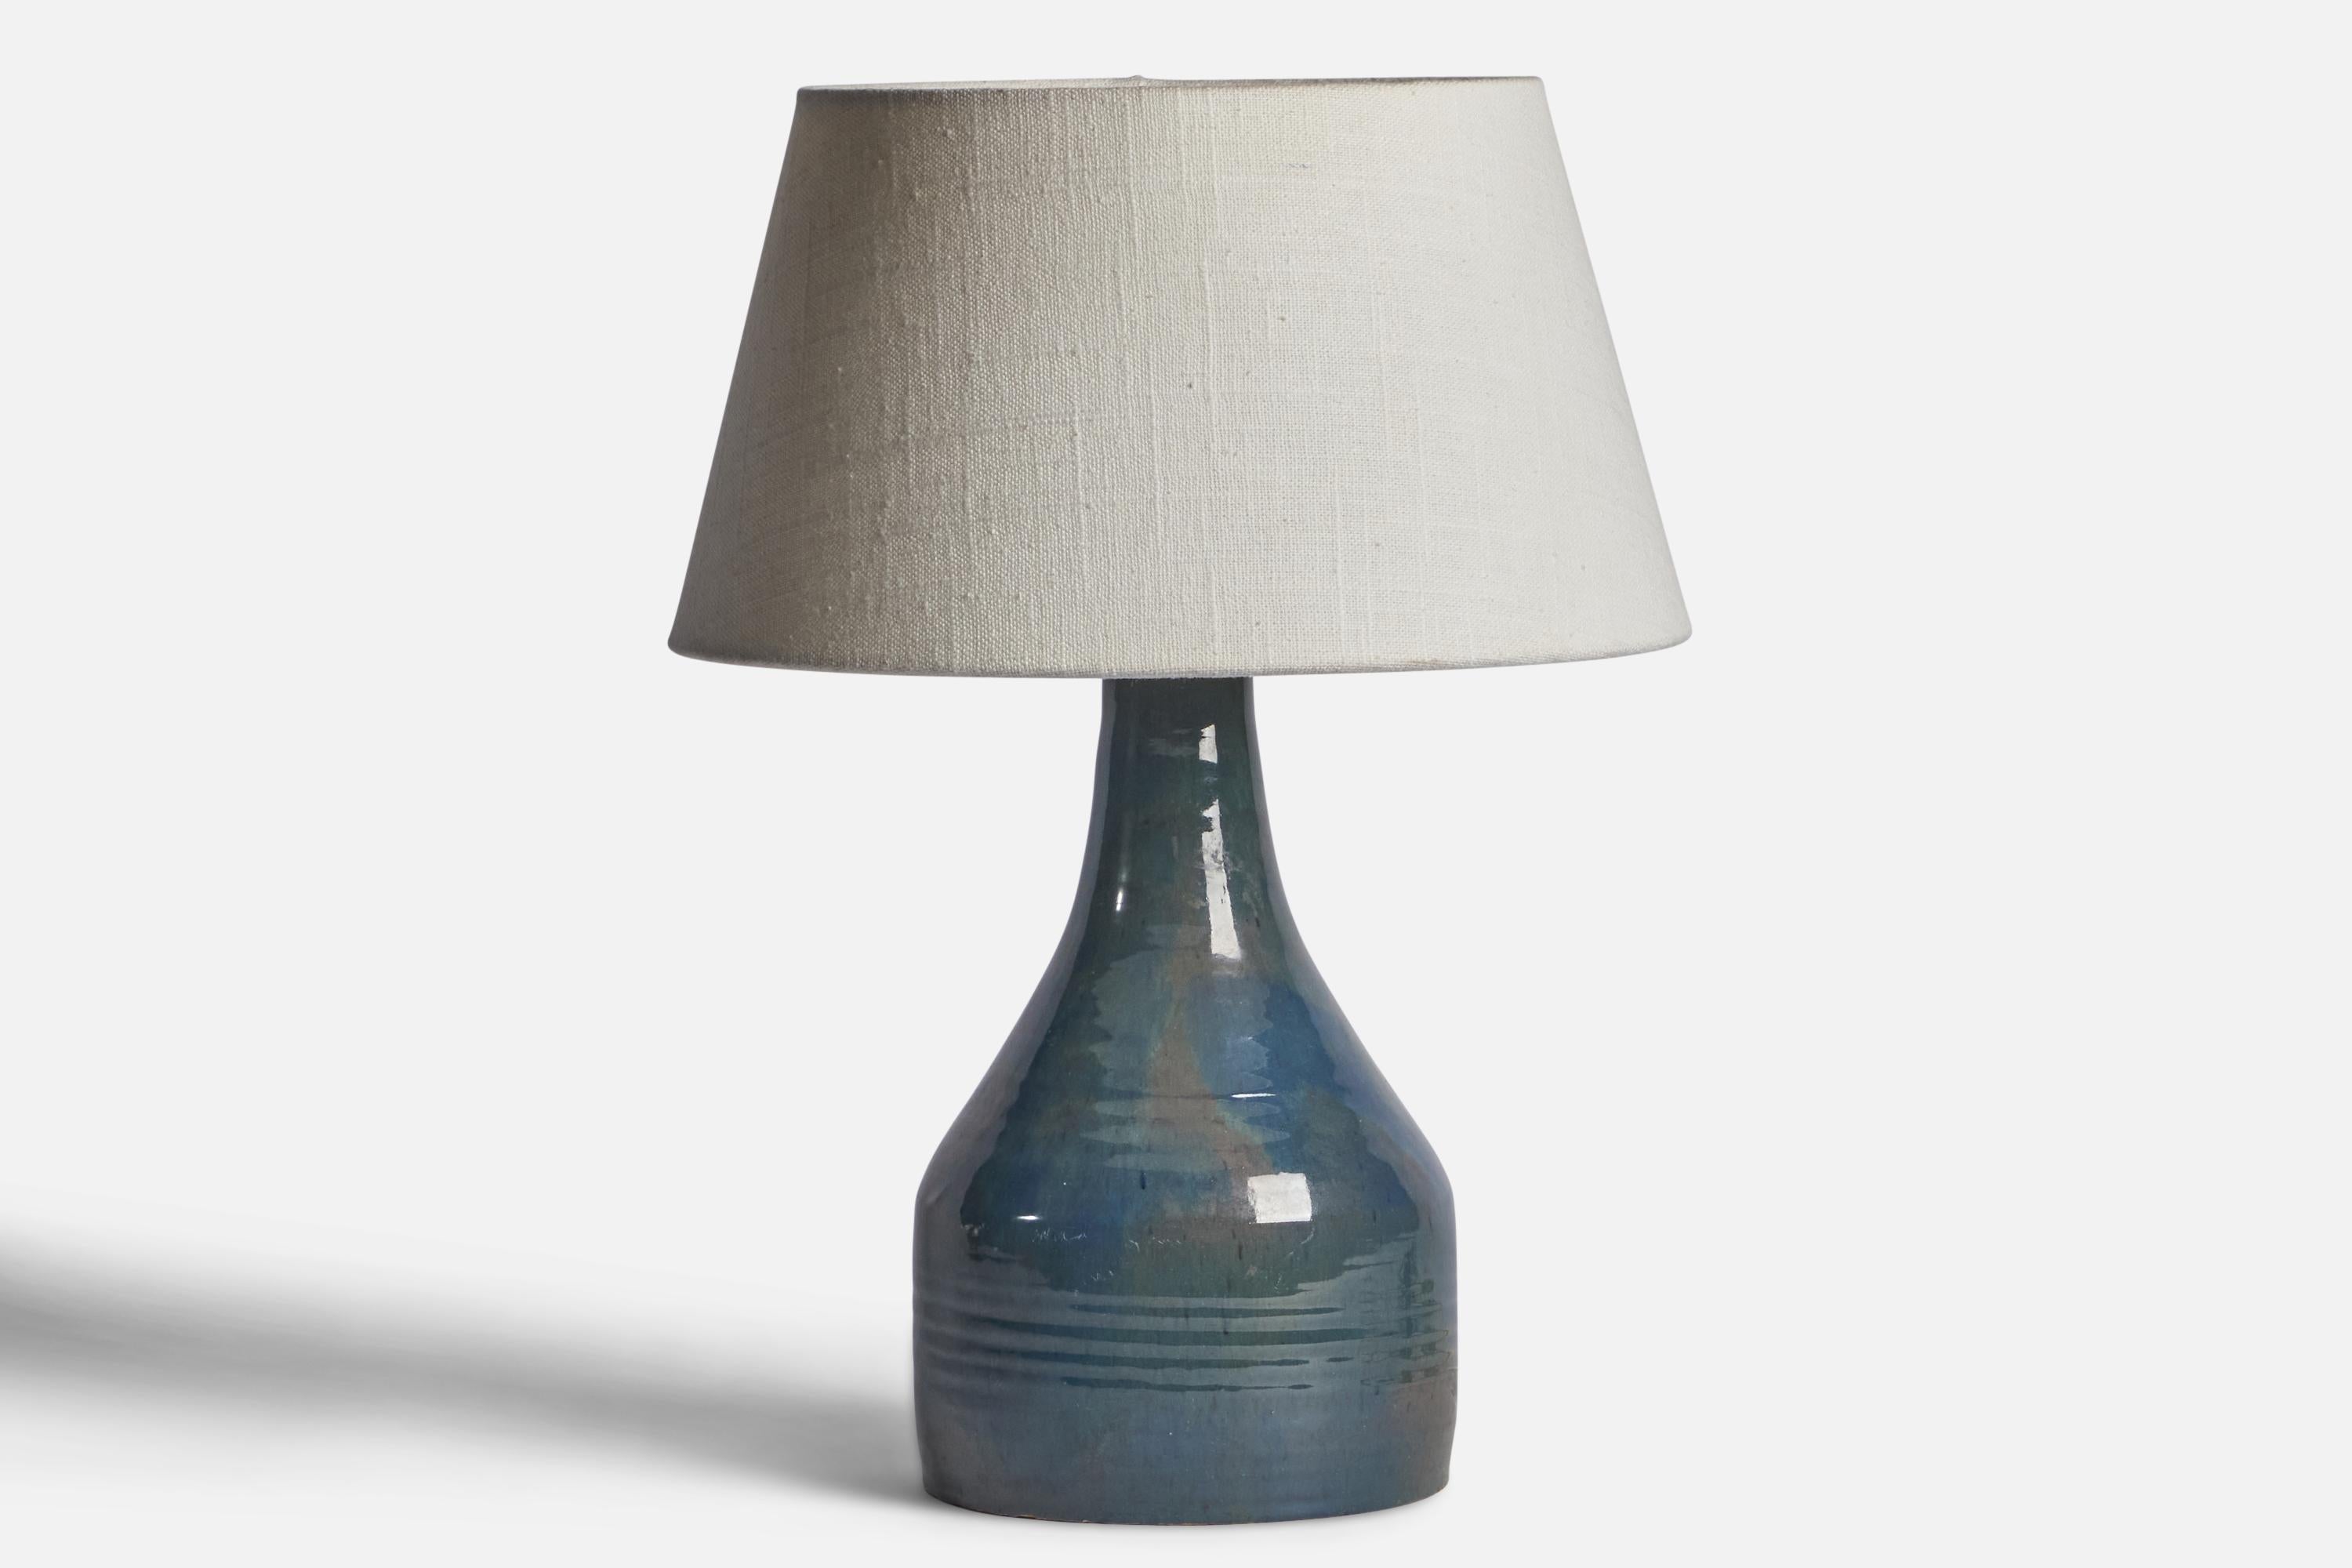 A blue-glazed incised ceramic table lamp designed and produced in Sweden, 1960s.

Dimensions of Lamp (inches): 10.65” H x 5.25” Diameter
Dimensions of Shade (inches): 7” Top Diameter x 10” Bottom Diameter x 5.5” H 
Dimensions of Lamp with Shade